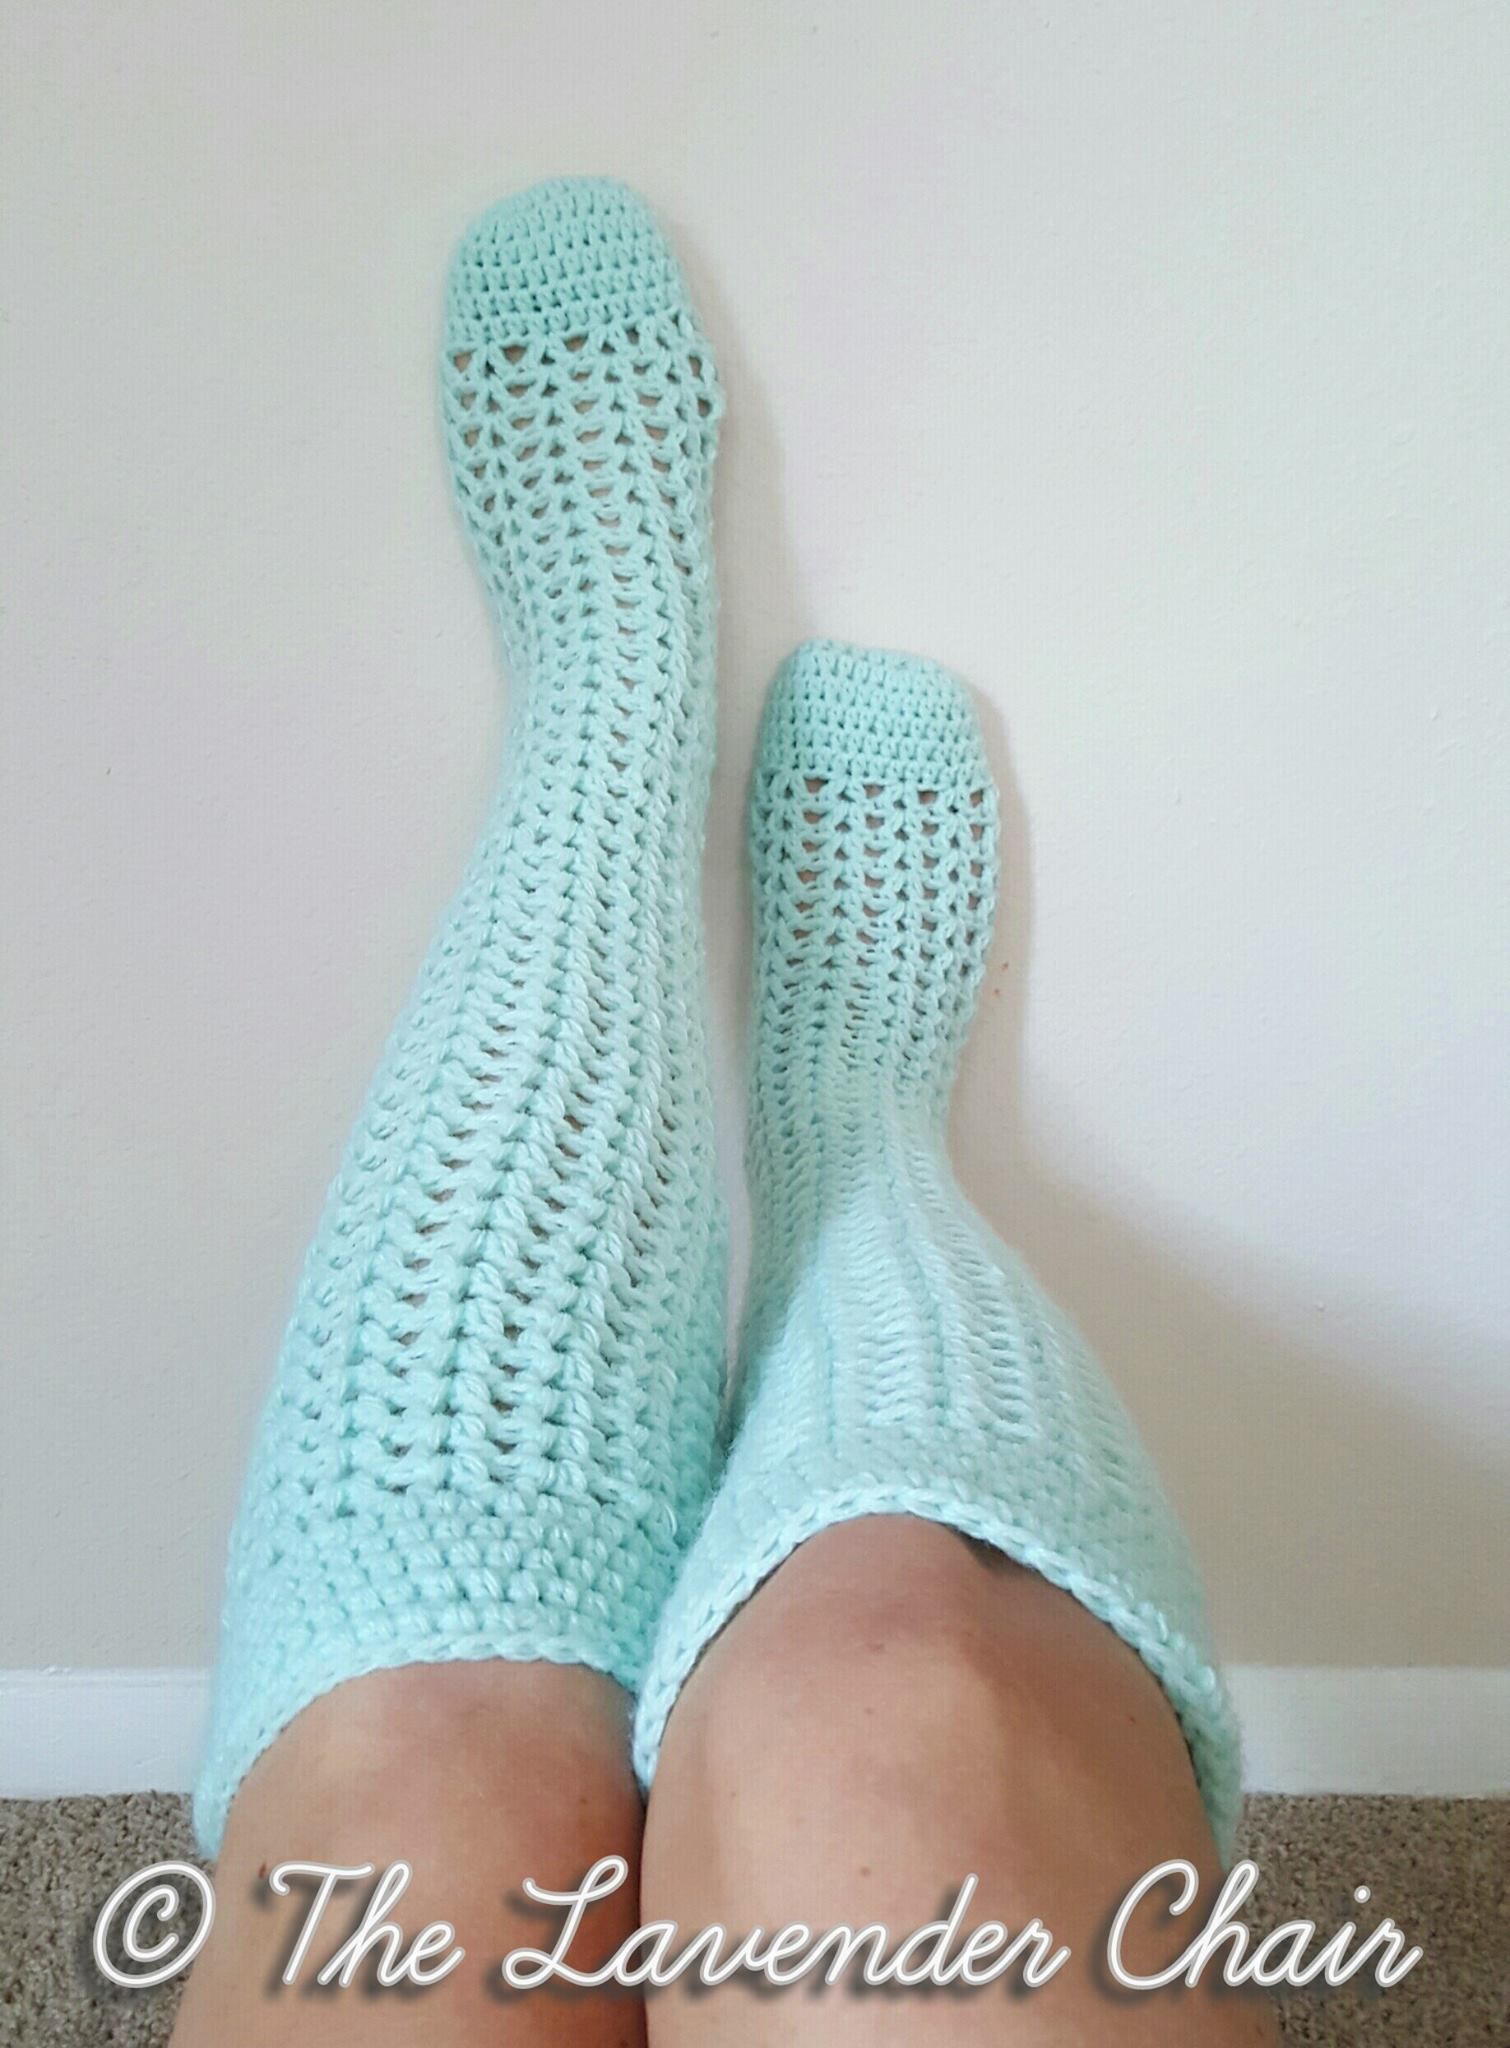 Give a warm feeling to your feet with  sock crochet patterns